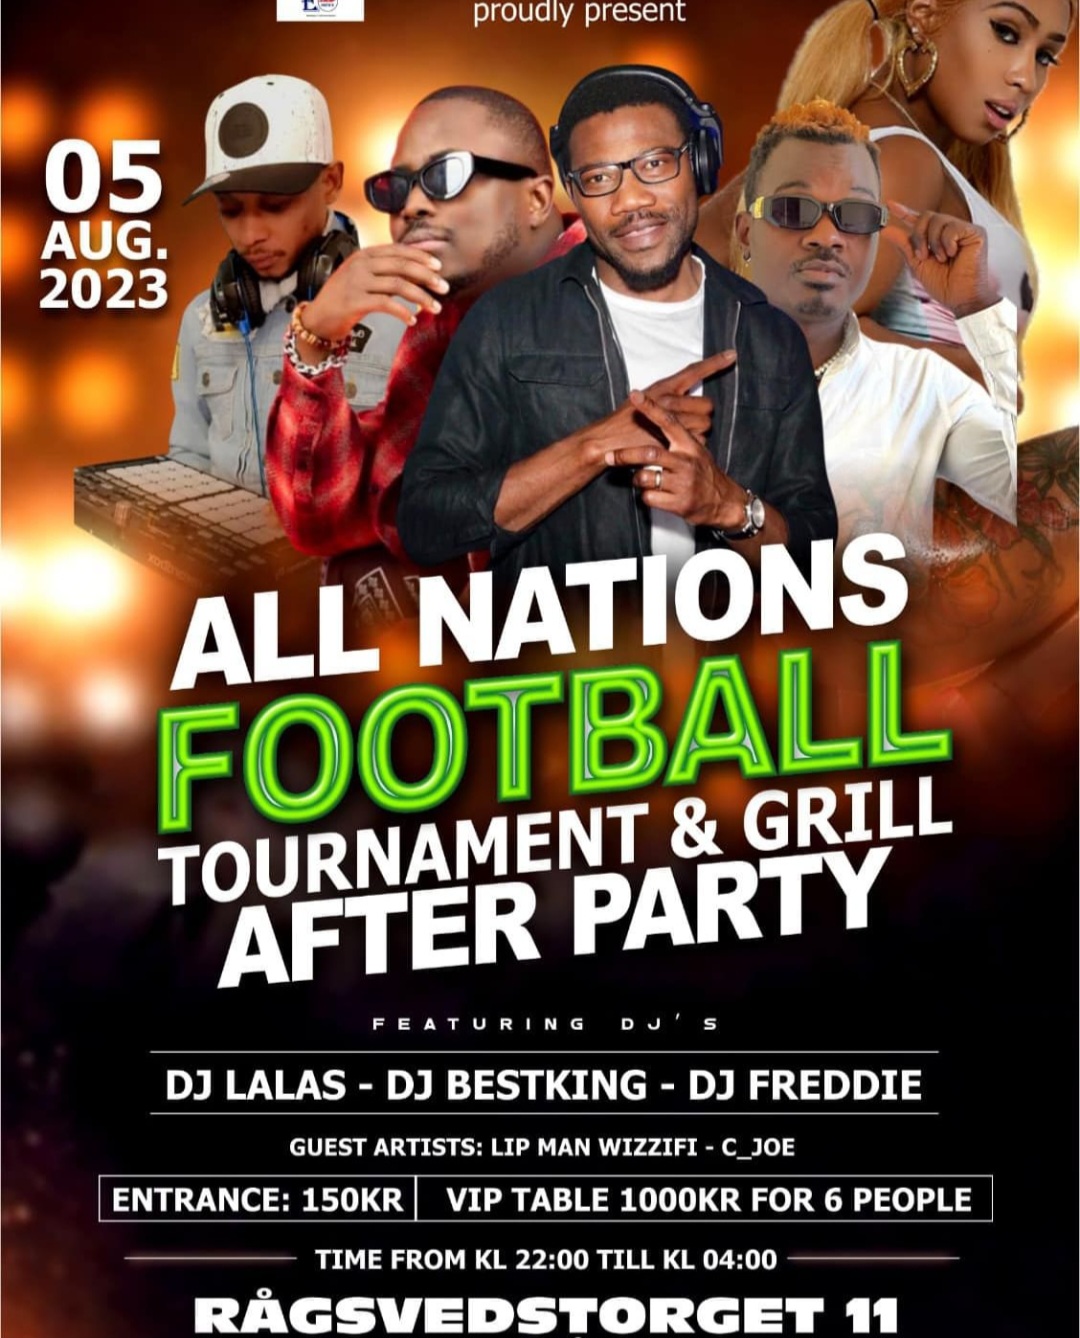 EVENEMANG! All nations football after party (STOCKHOLM)